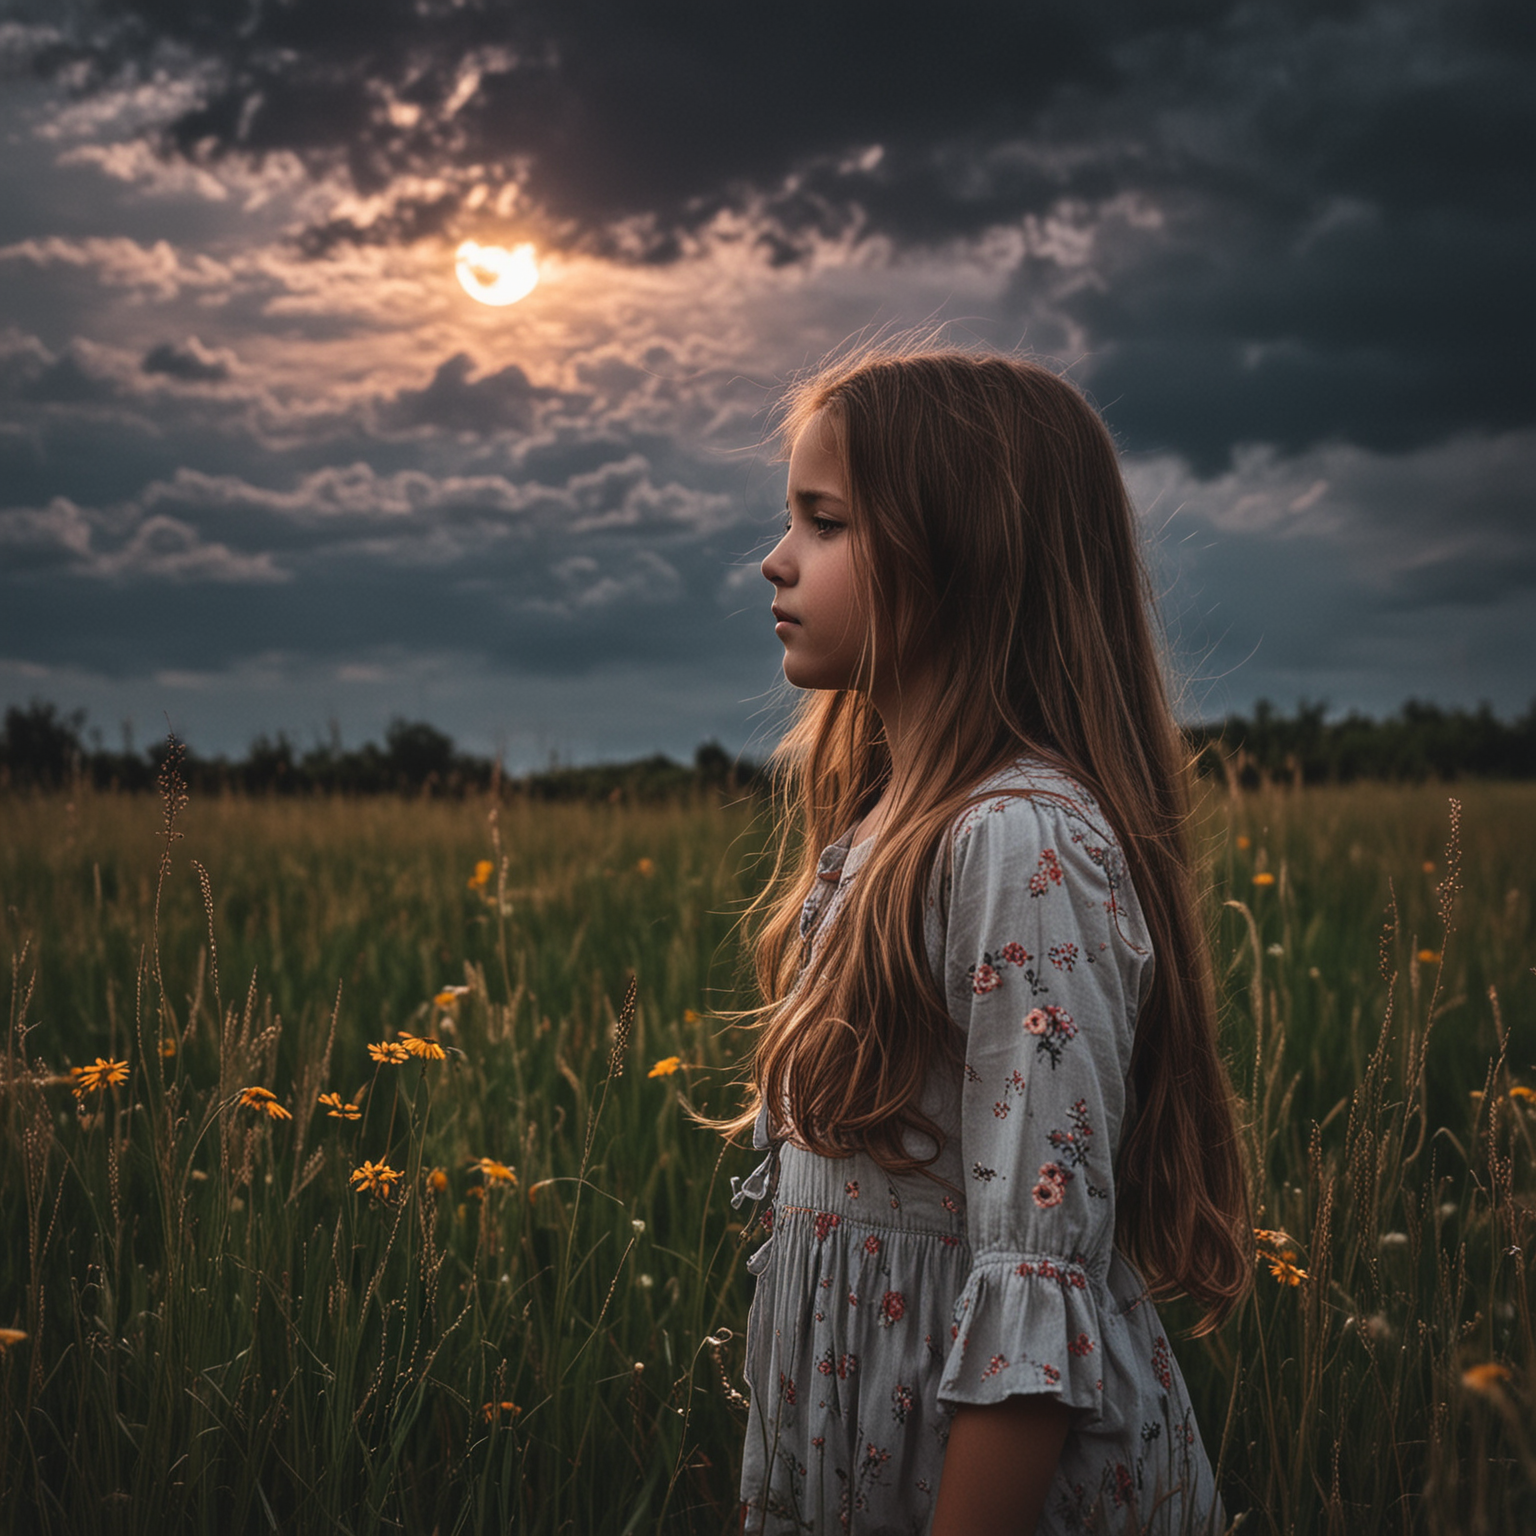 child alone sad backlight long hair back high grass colors flowers stormy clouds moon 